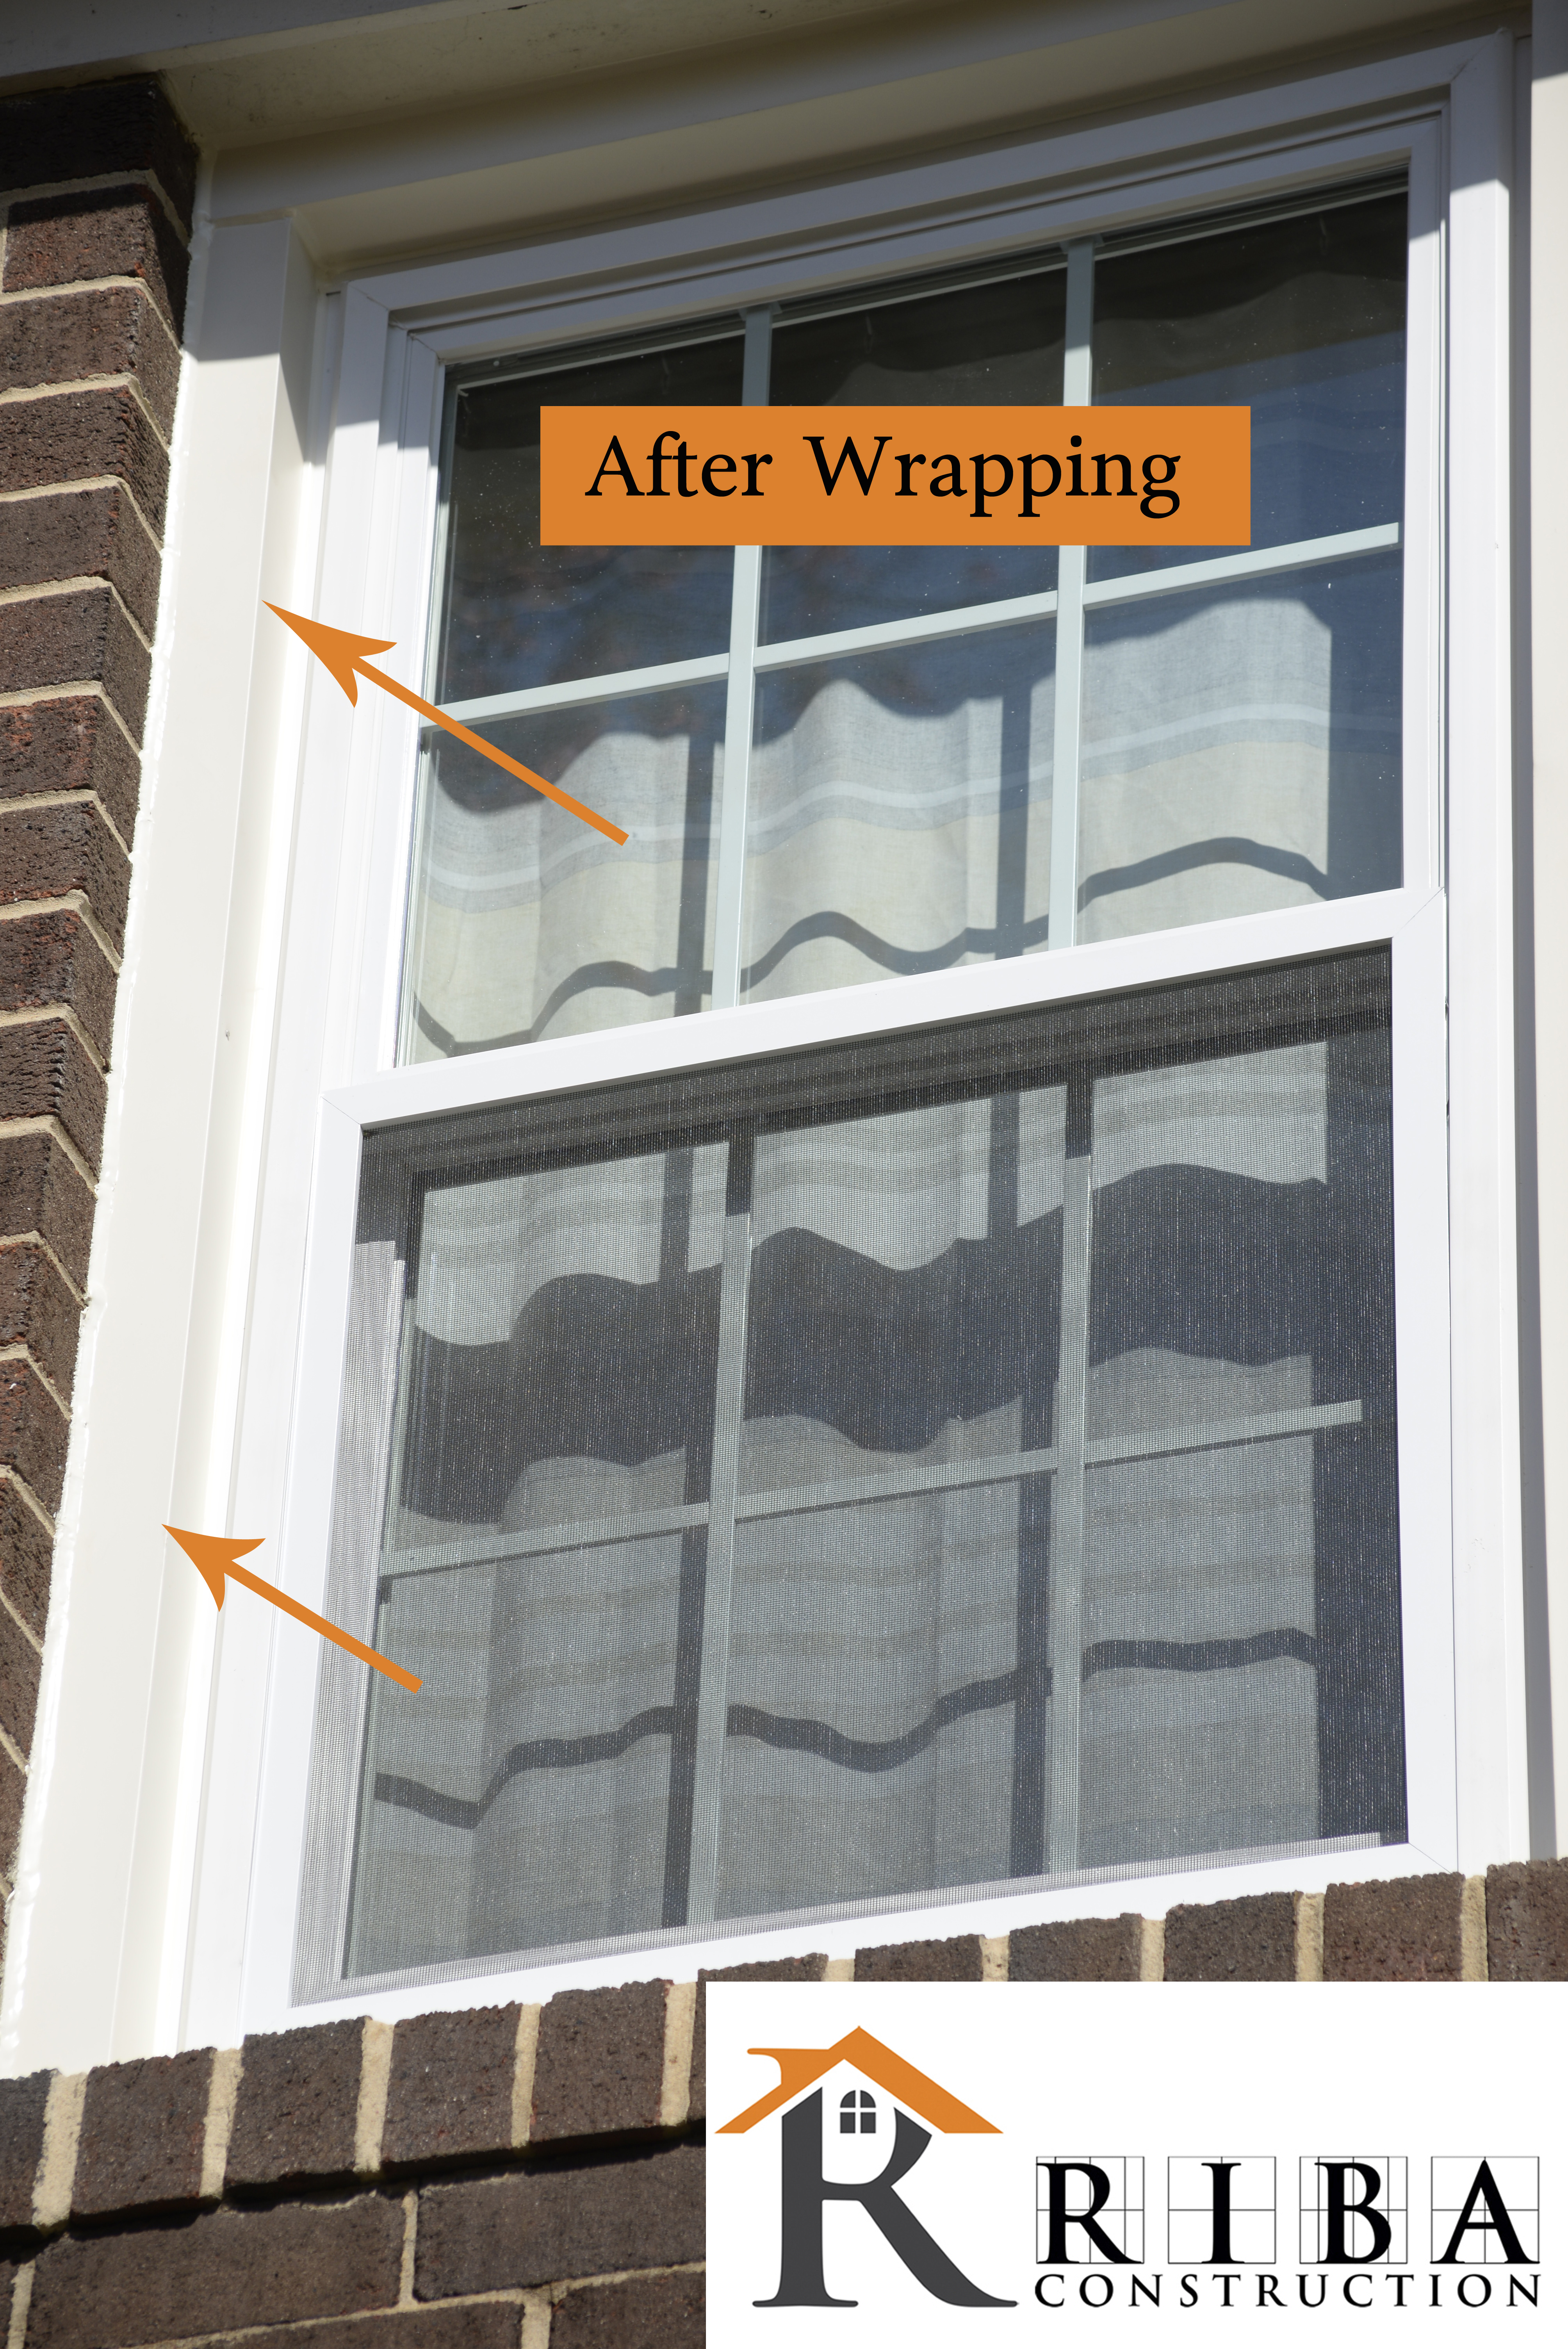 Window wrapping can significantly improve energy efficiency